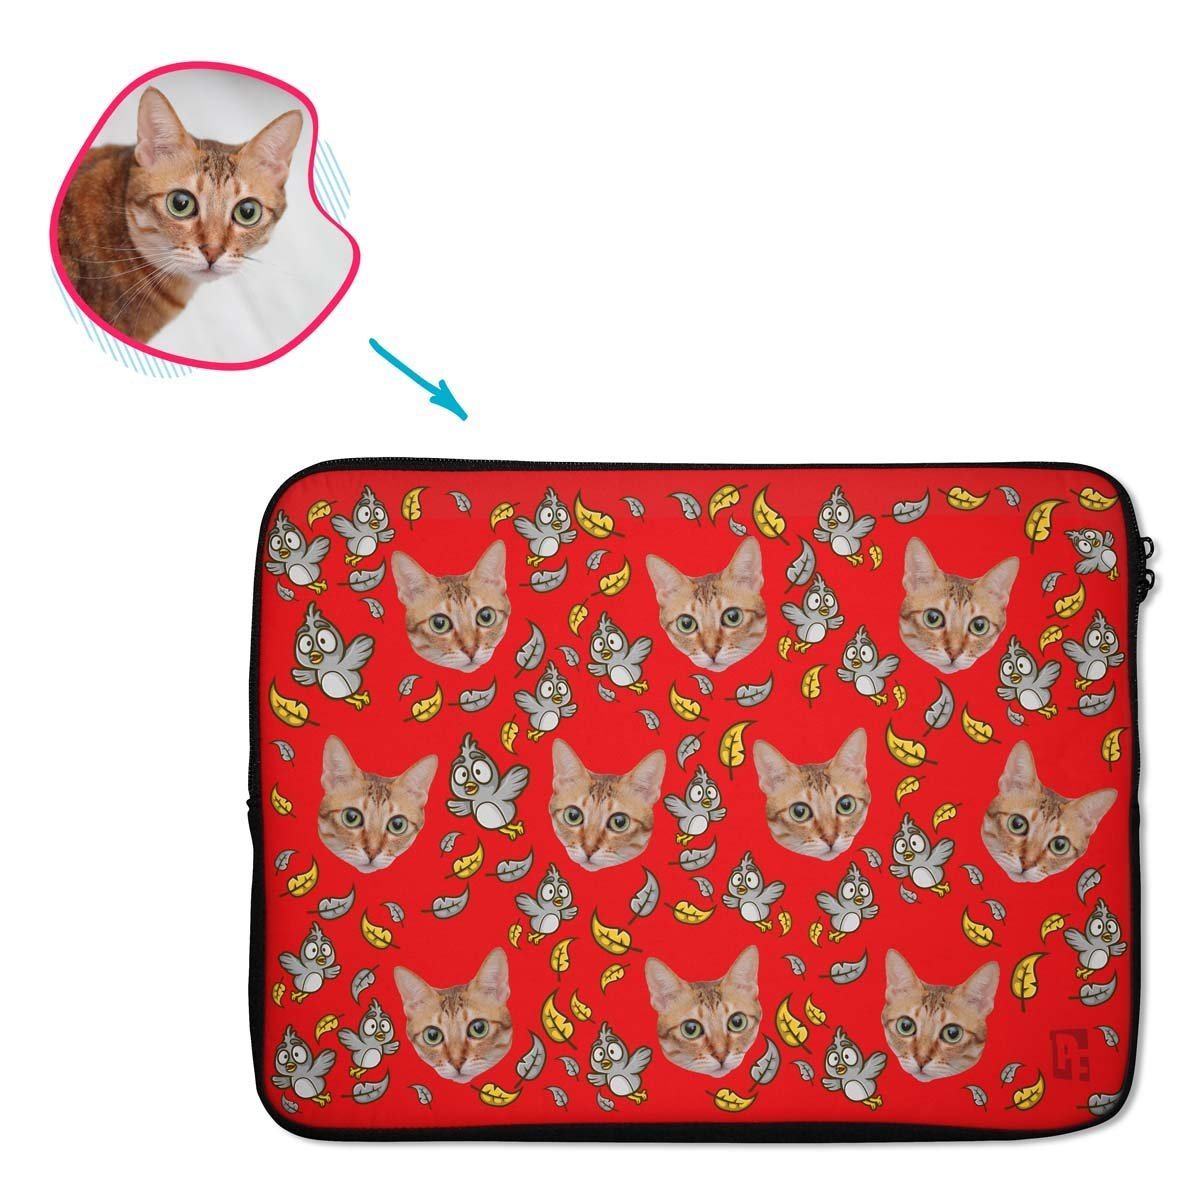 red Bird laptop sleeve personalized with photo of face printed on them